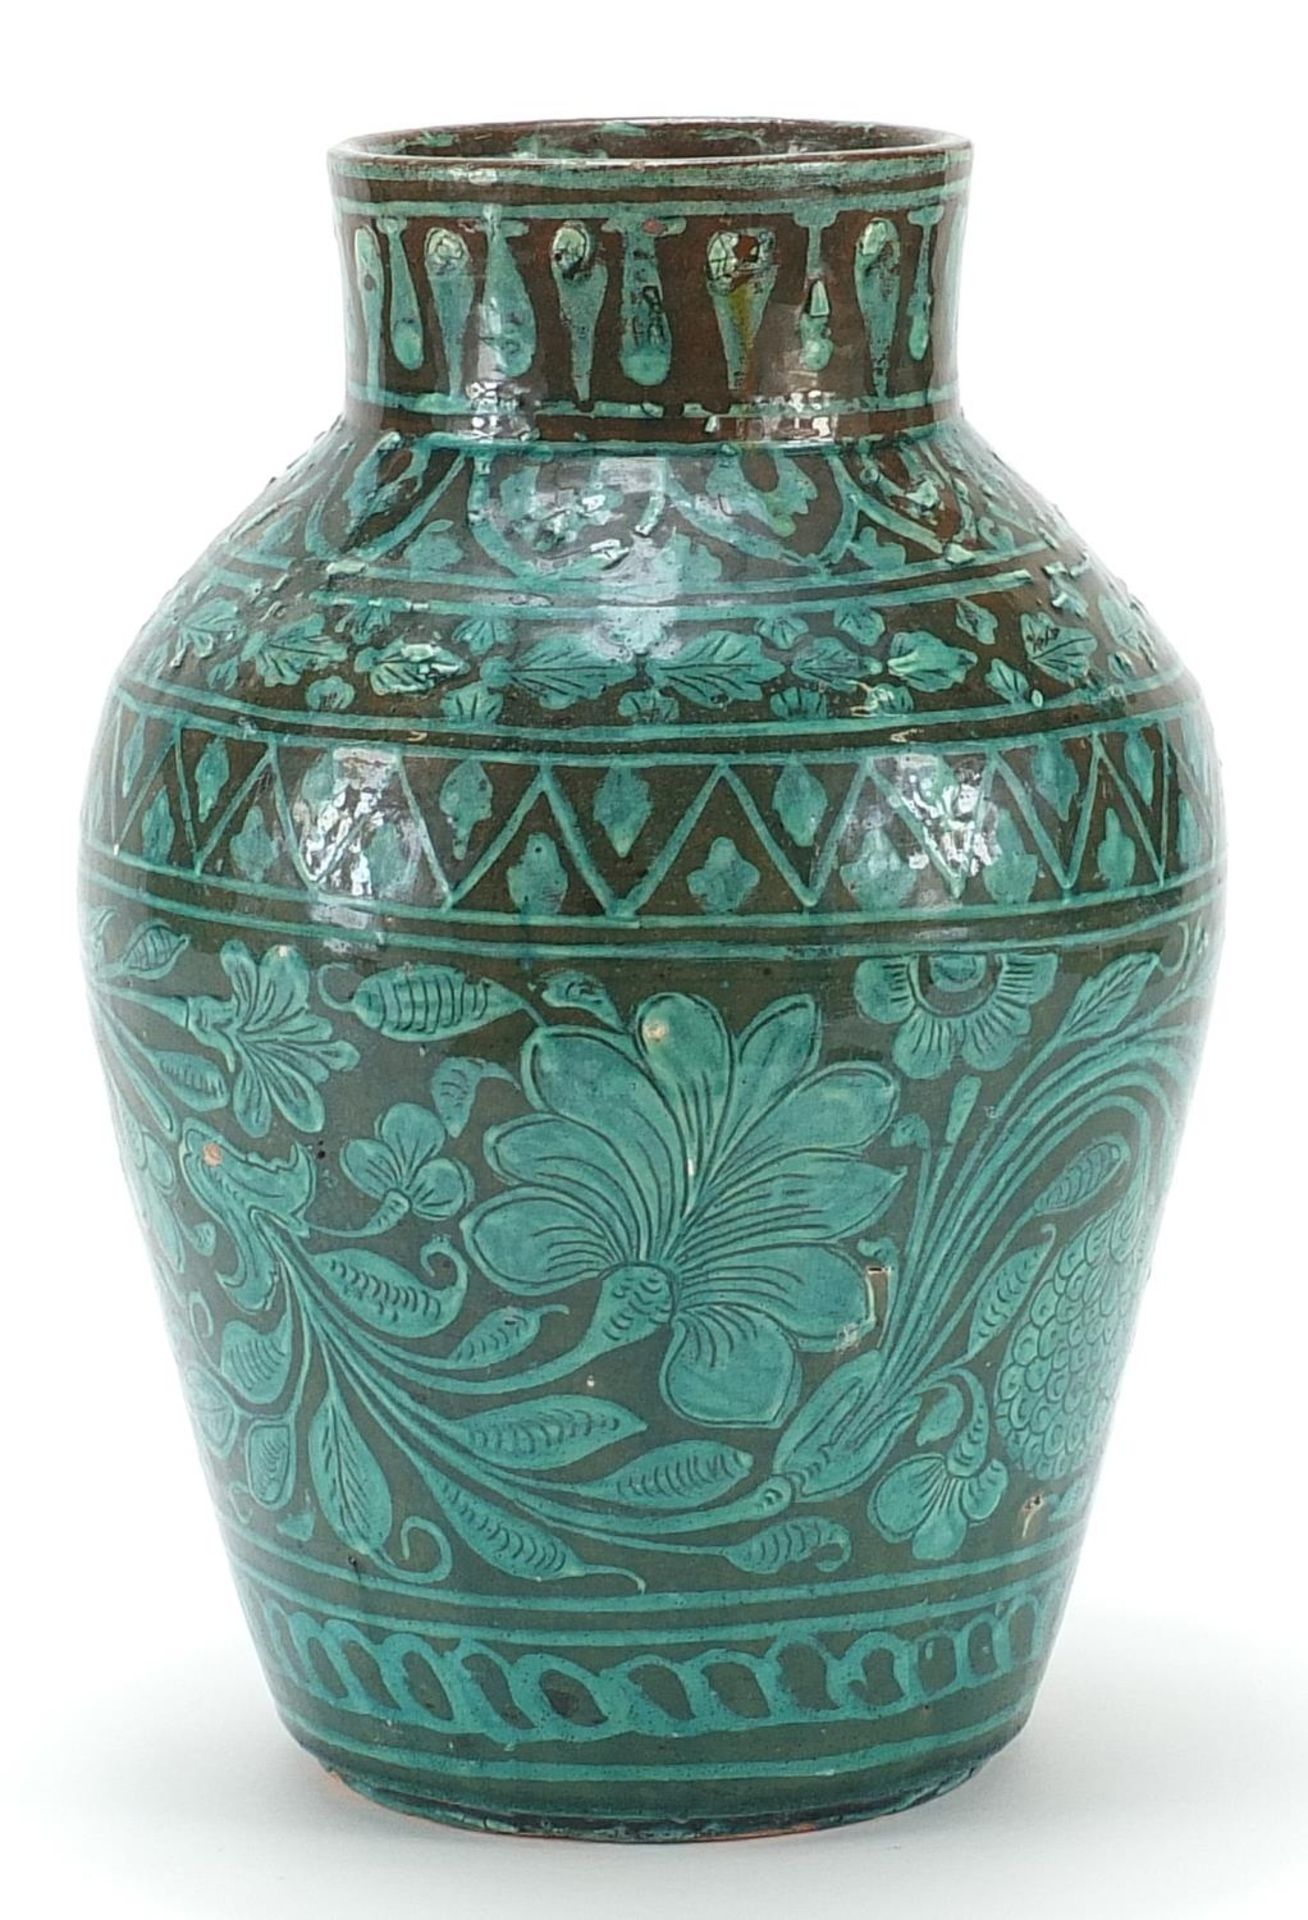 Middle Eastern pottery vase hand painted with flowers, 24.5cm high - Image 2 of 3